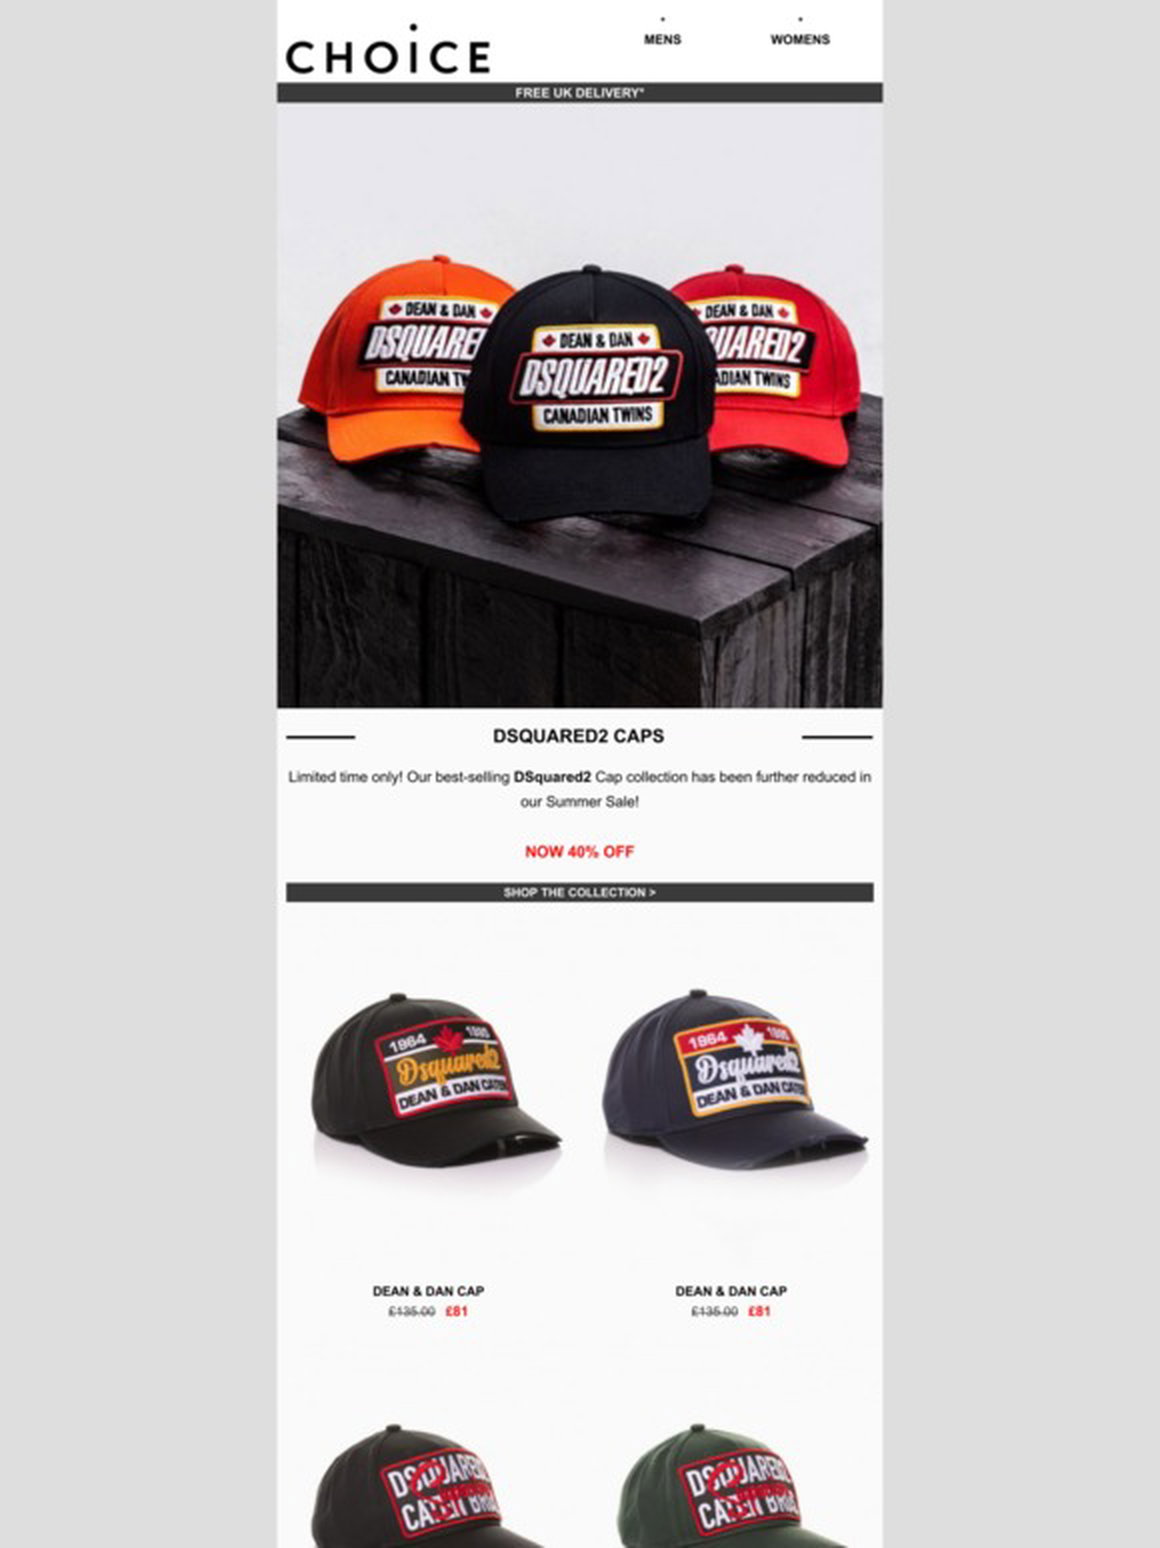 Off DSquared2 caps in the Summer Sale 